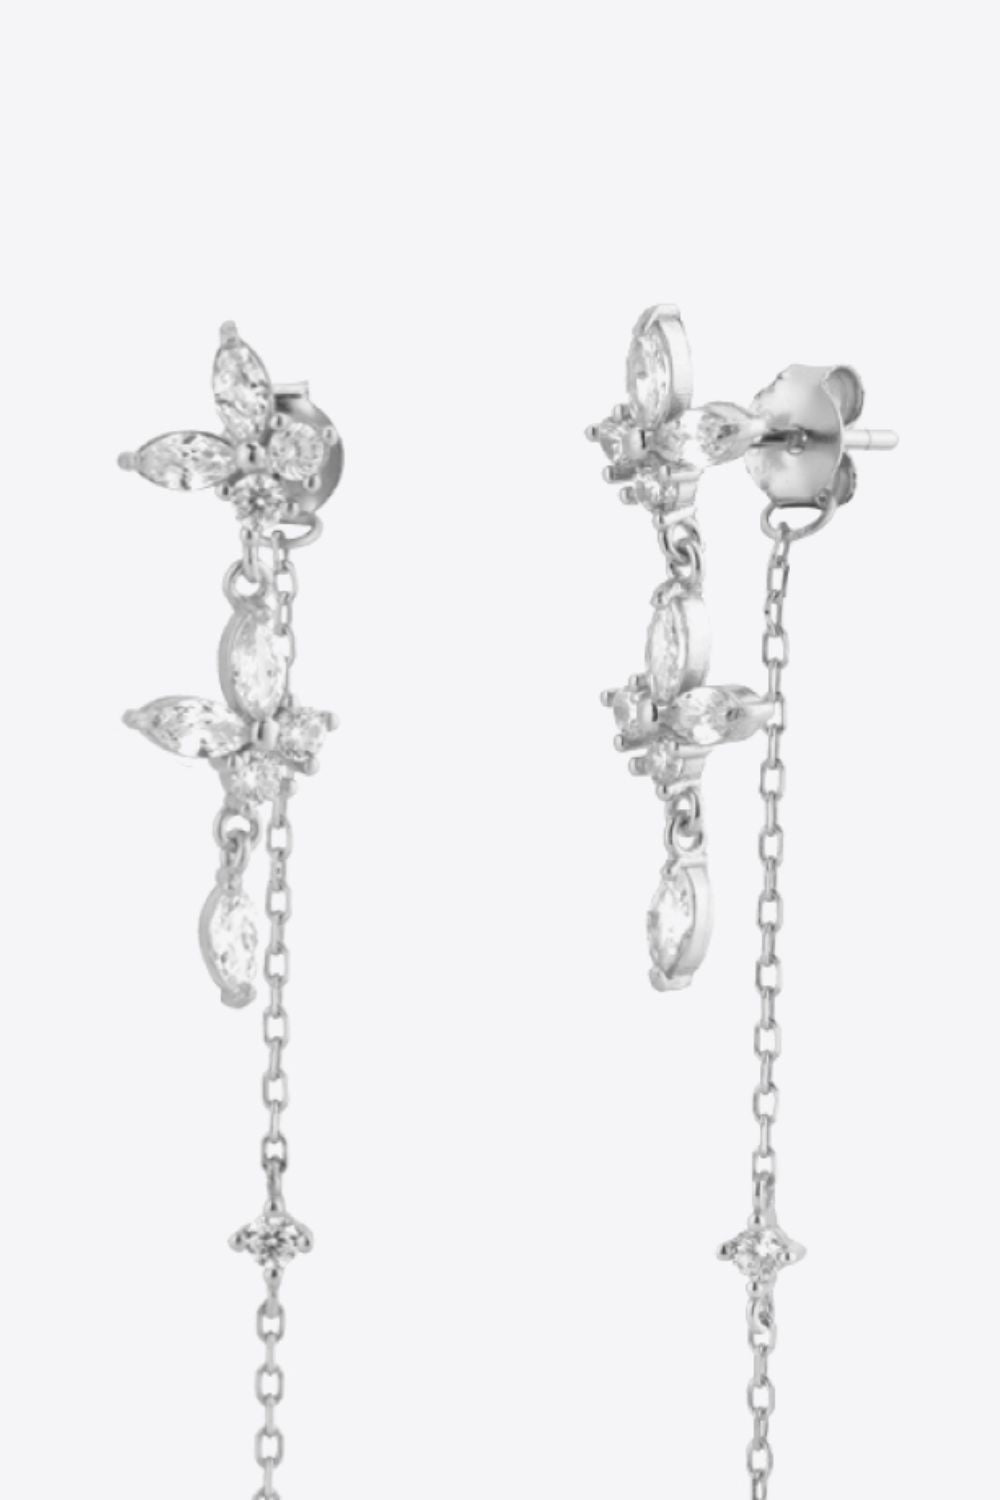 Adorn yourself with our flower earrings, a symbol of blooming beauty and elegance.